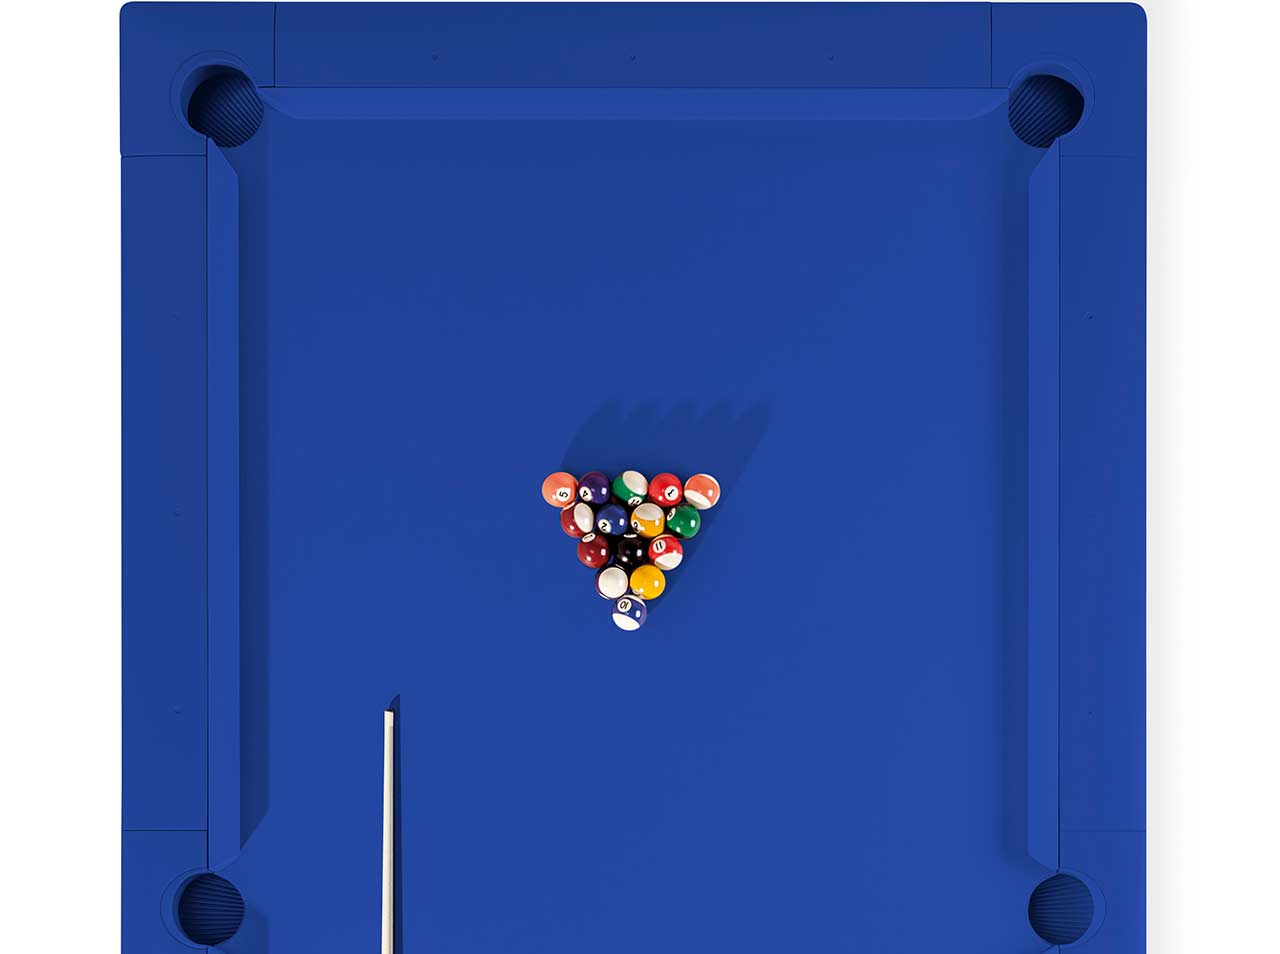 Embark on a Chromatic Game of Pool With Nuevepies Monocolor Billiards